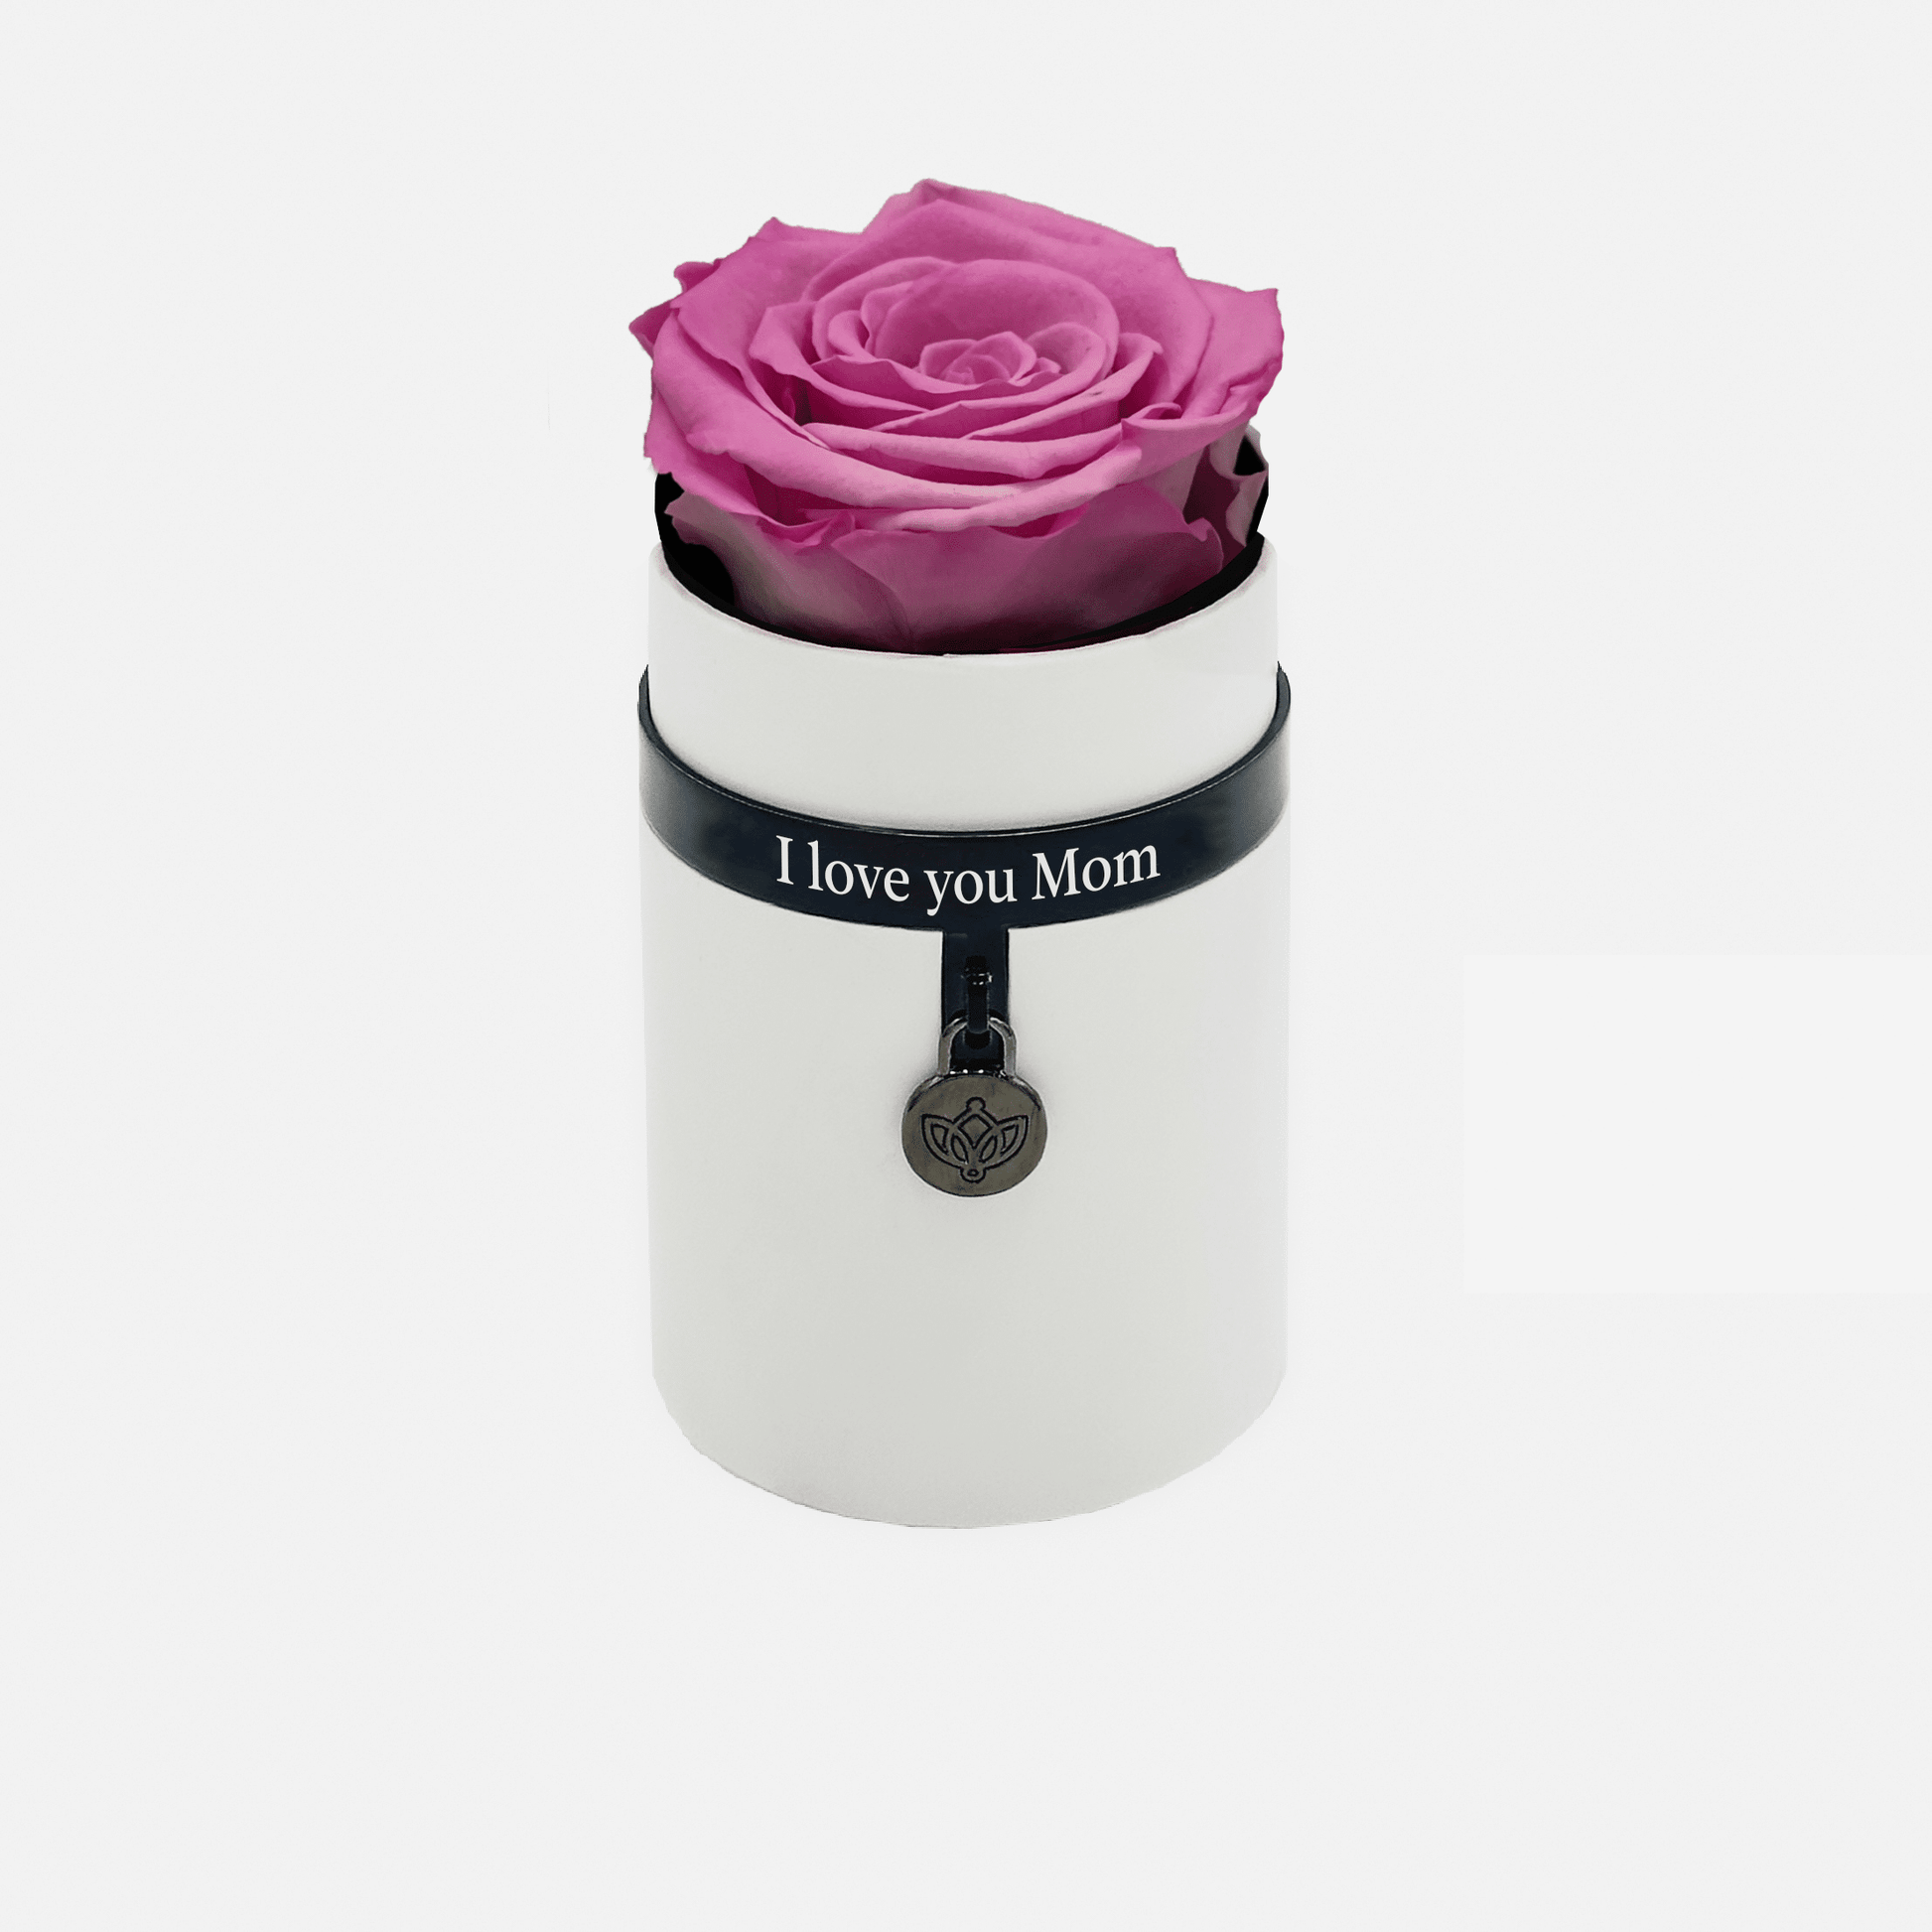 One in a Million™ Round White Box | I love you Mom | Candy Pink Rose - The Million Roses